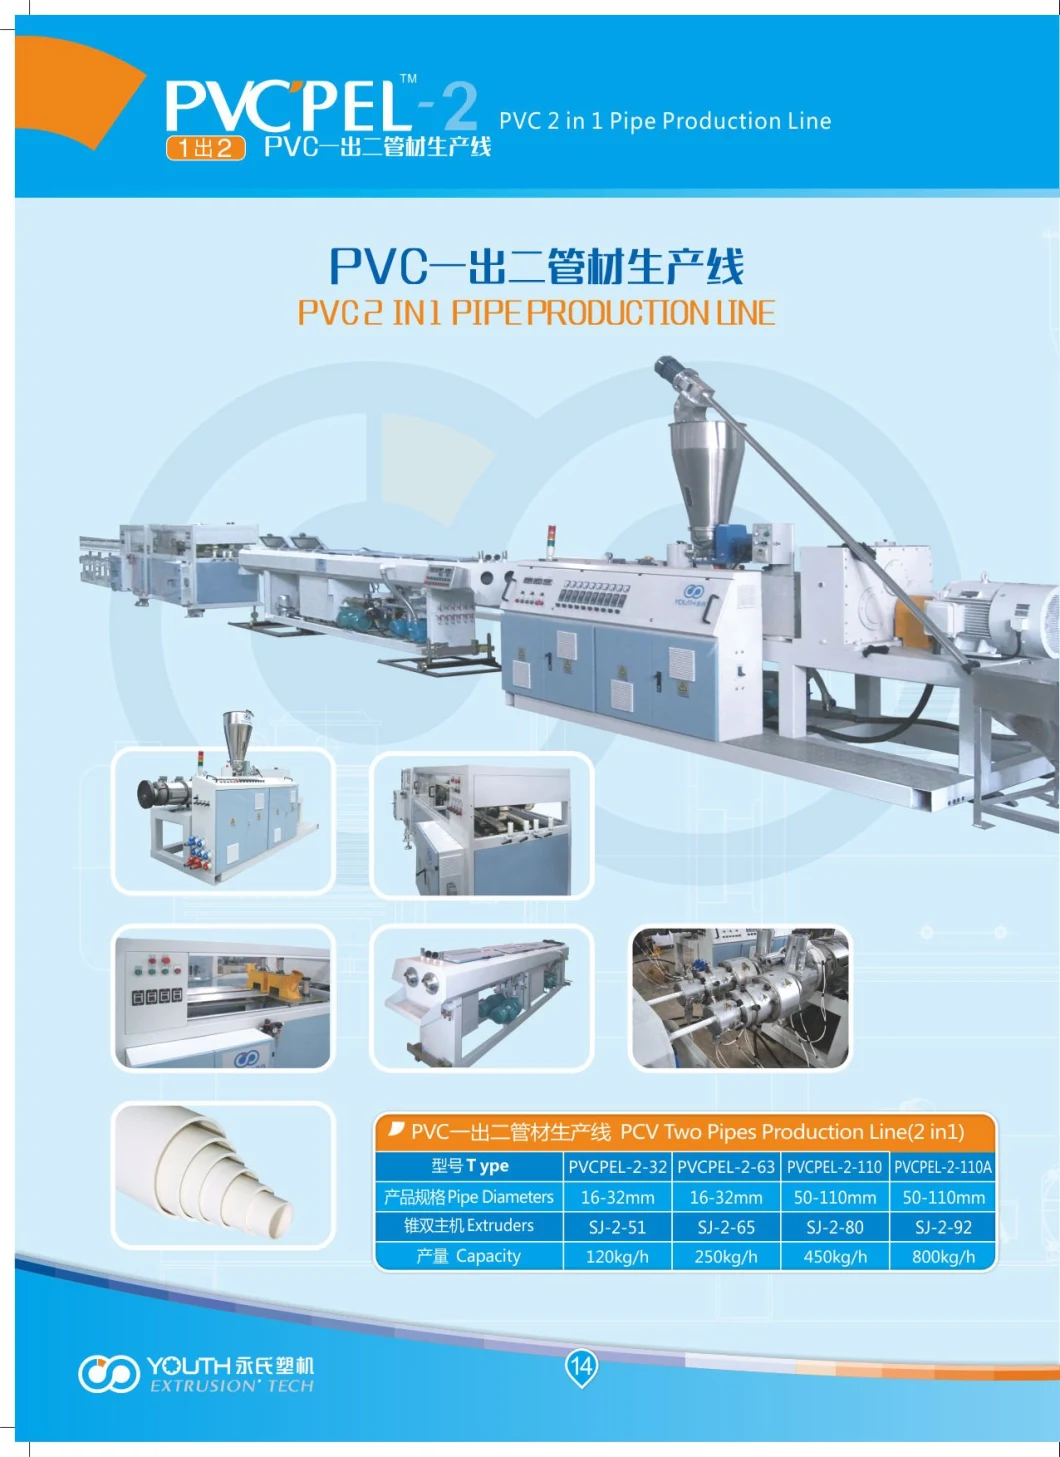 Pipe Making Machine/Pipe Extruder/PVC Pipe Manufacturing Machine/PVC Pipe Extruder Machine/Pipe Making Machine for Water/PVC Tube Extrusion Production Line